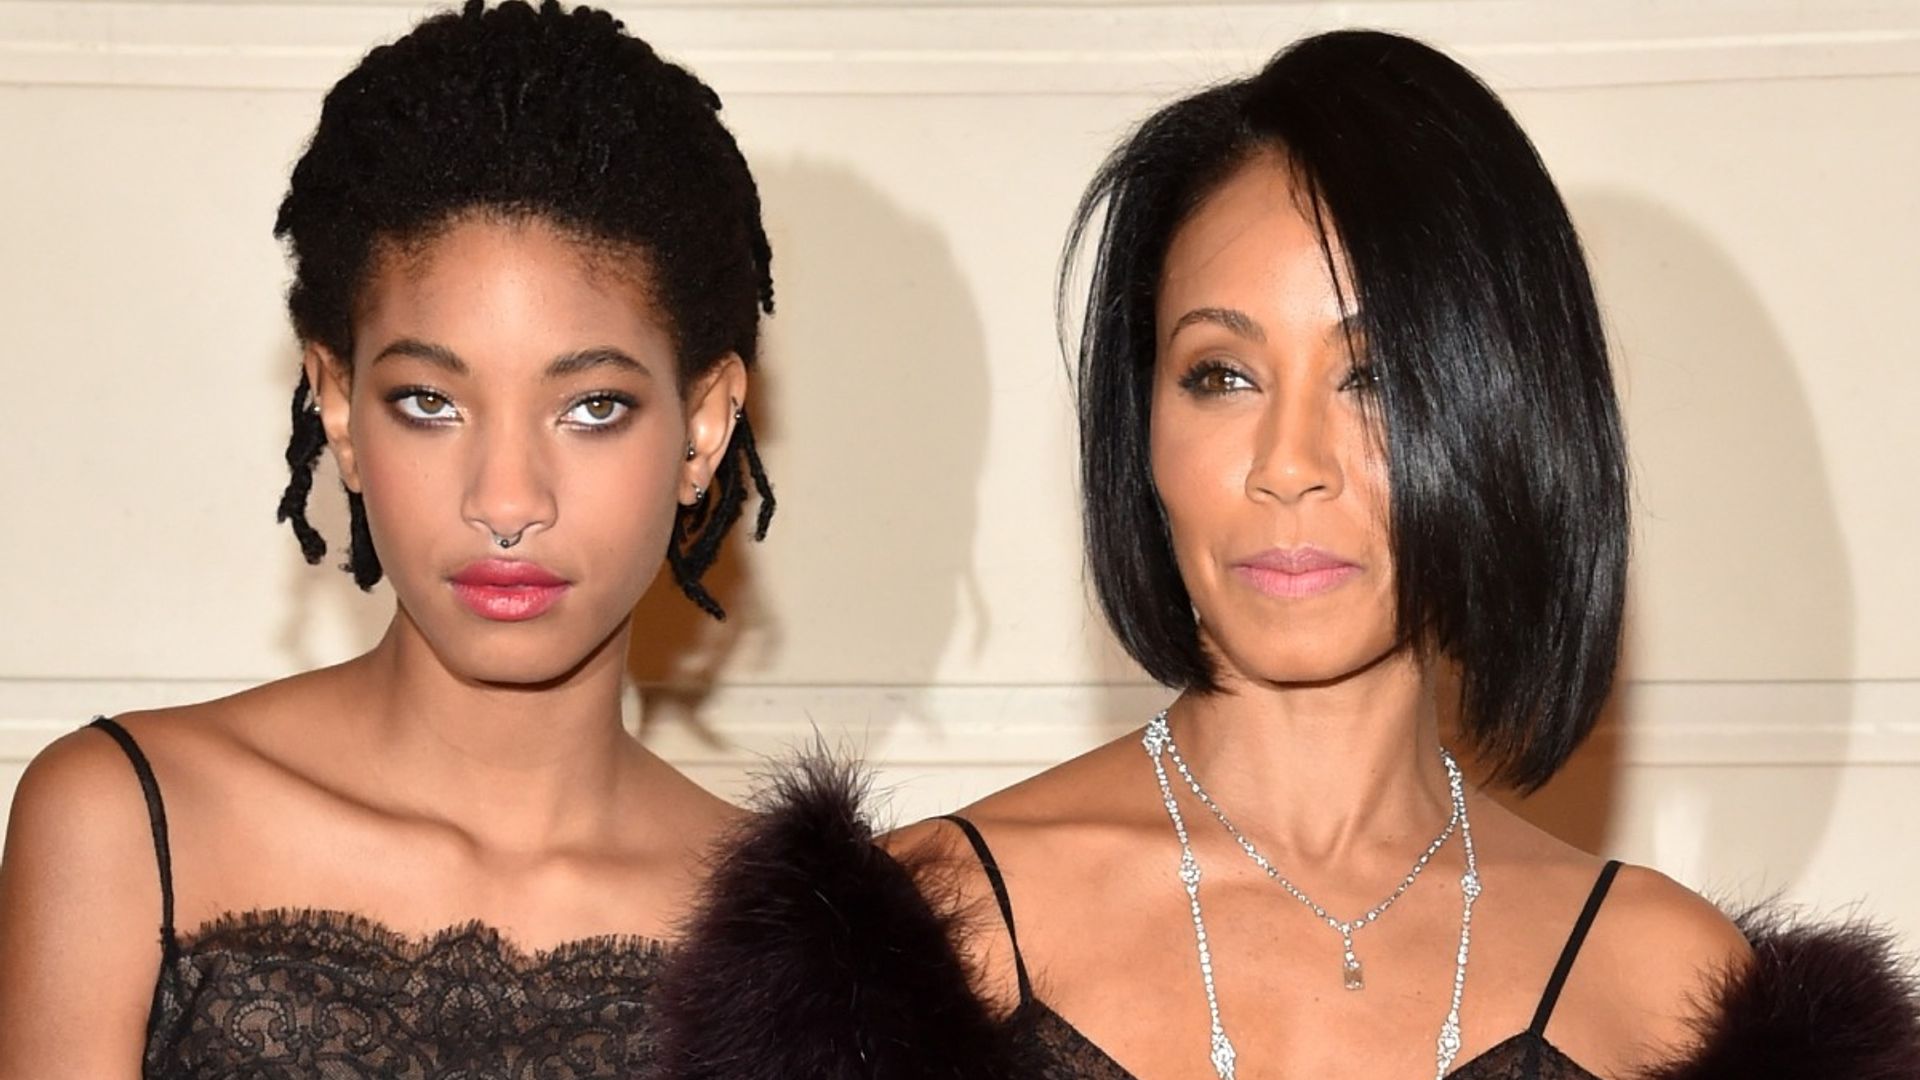 Will Smith's daughter Willow shares distressing details of mom Jada Pinkett Smith's past